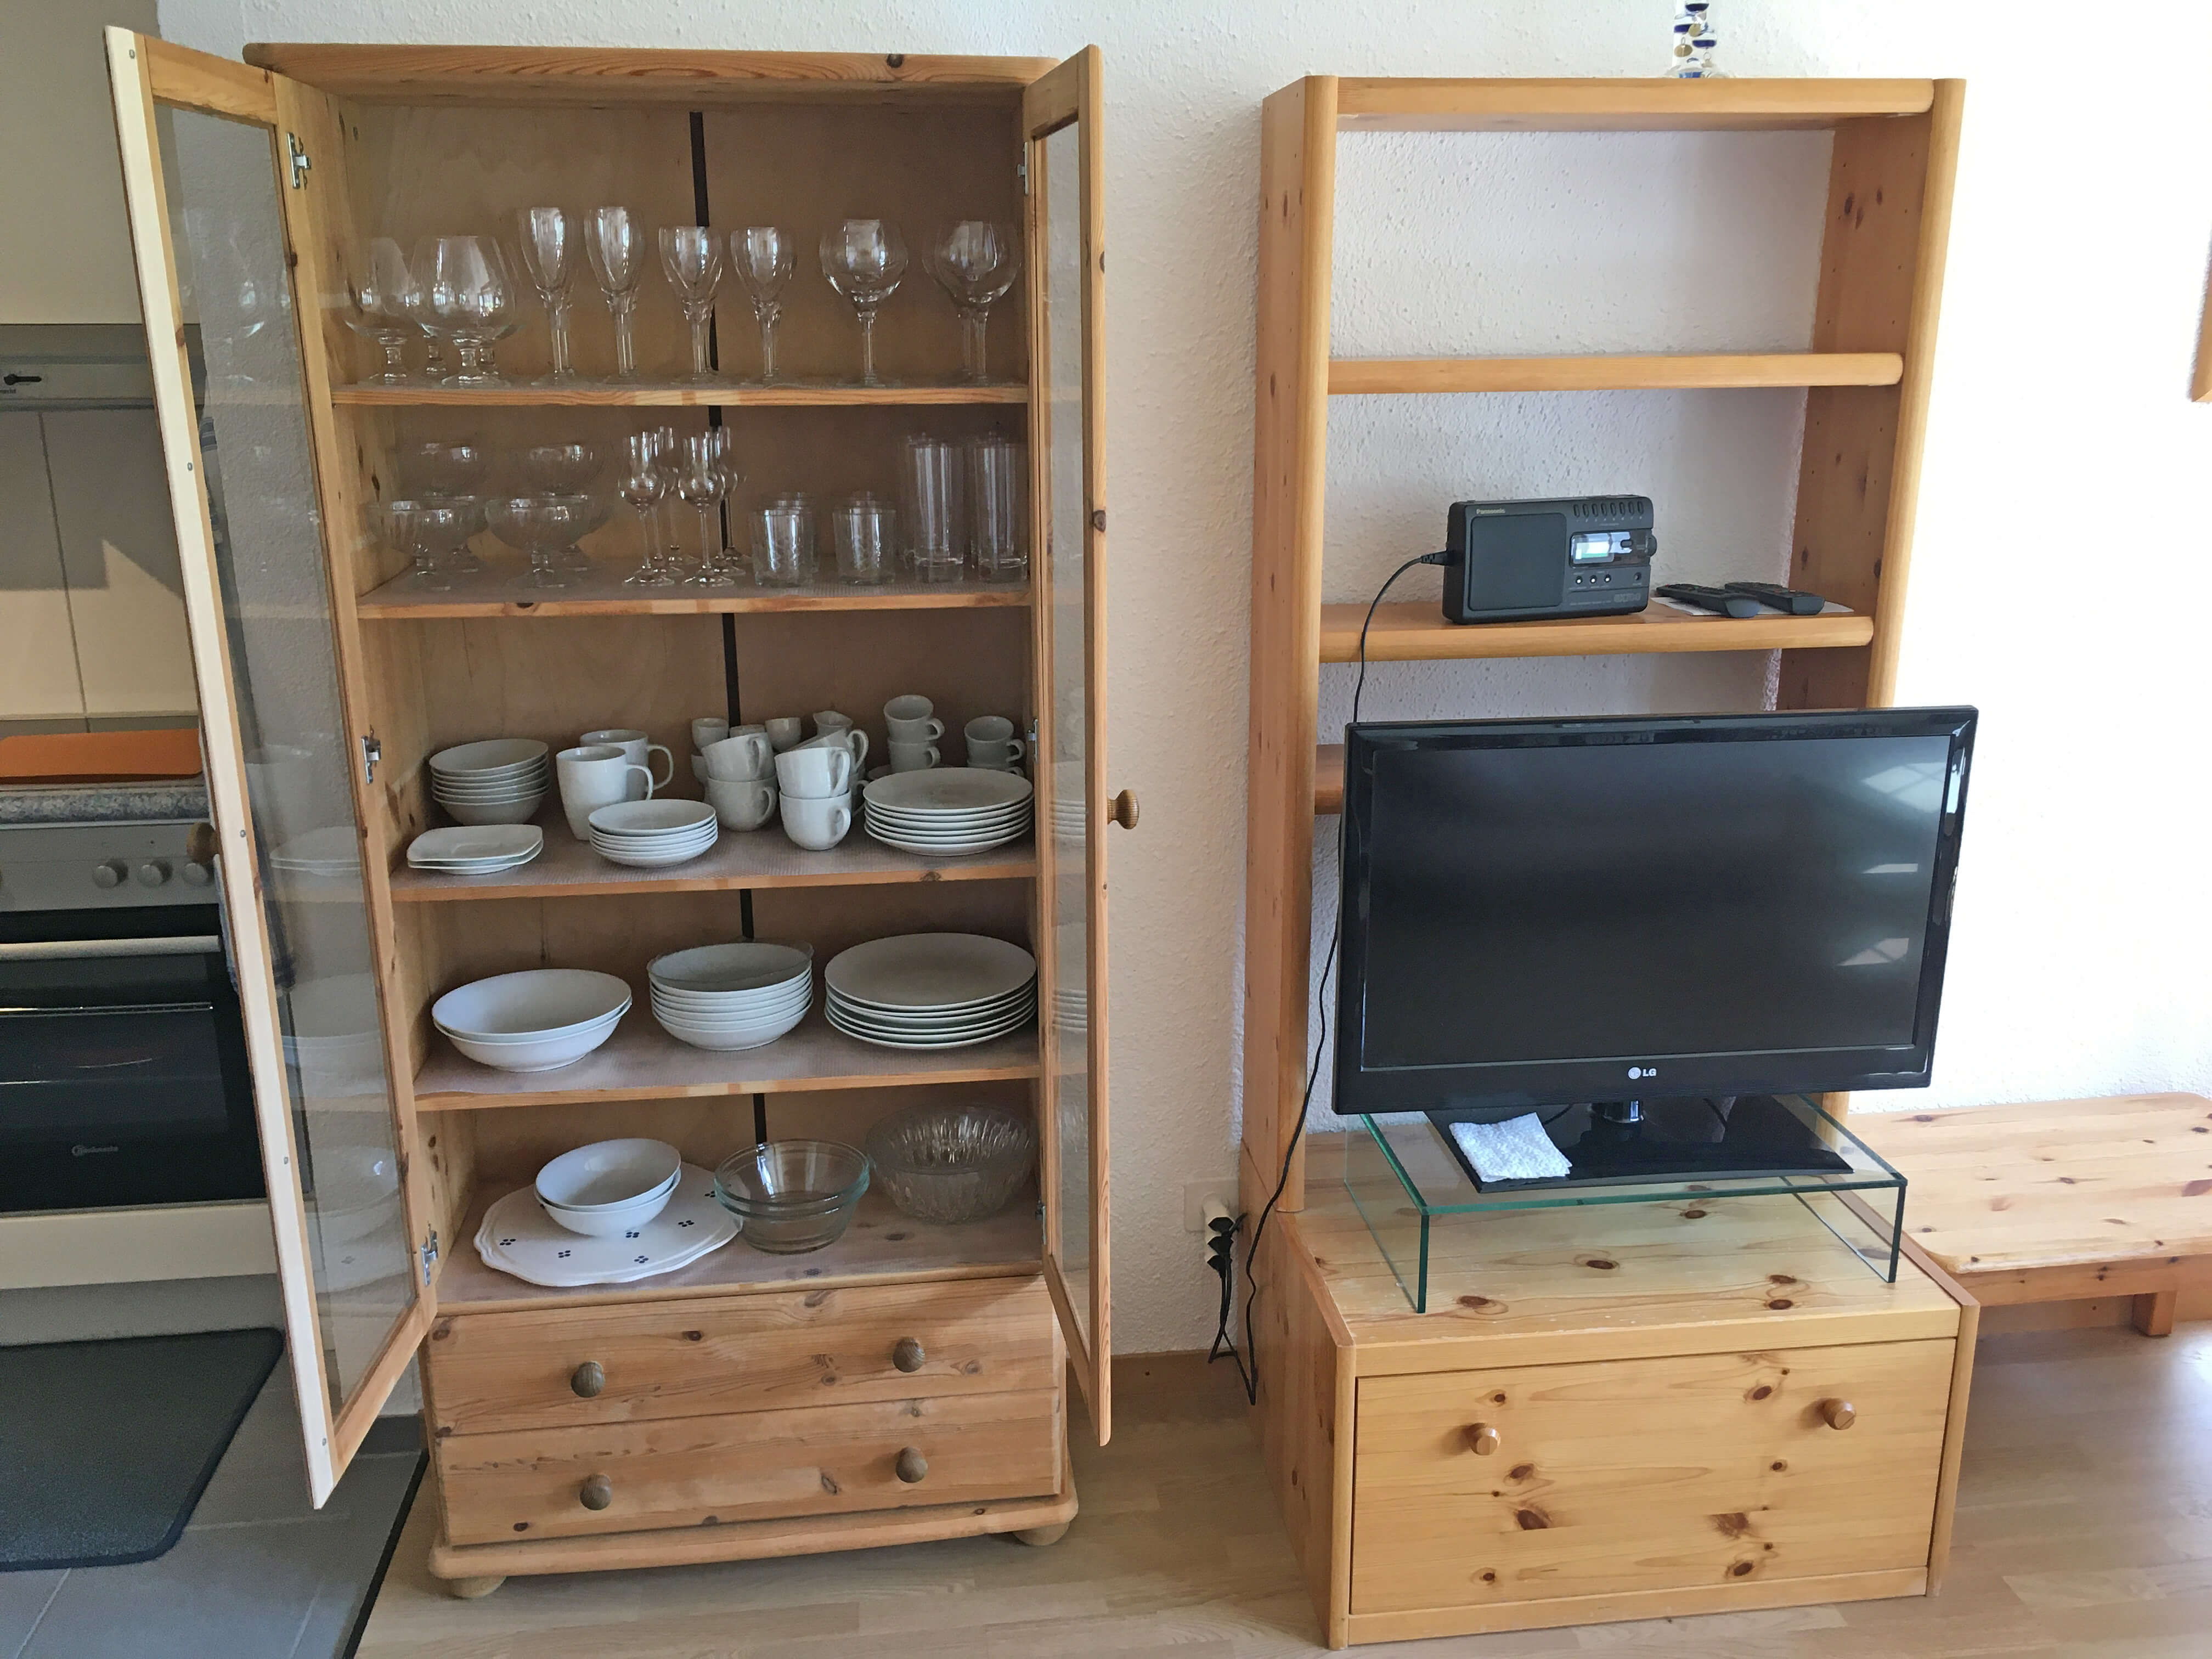 Crockery cupboard and television